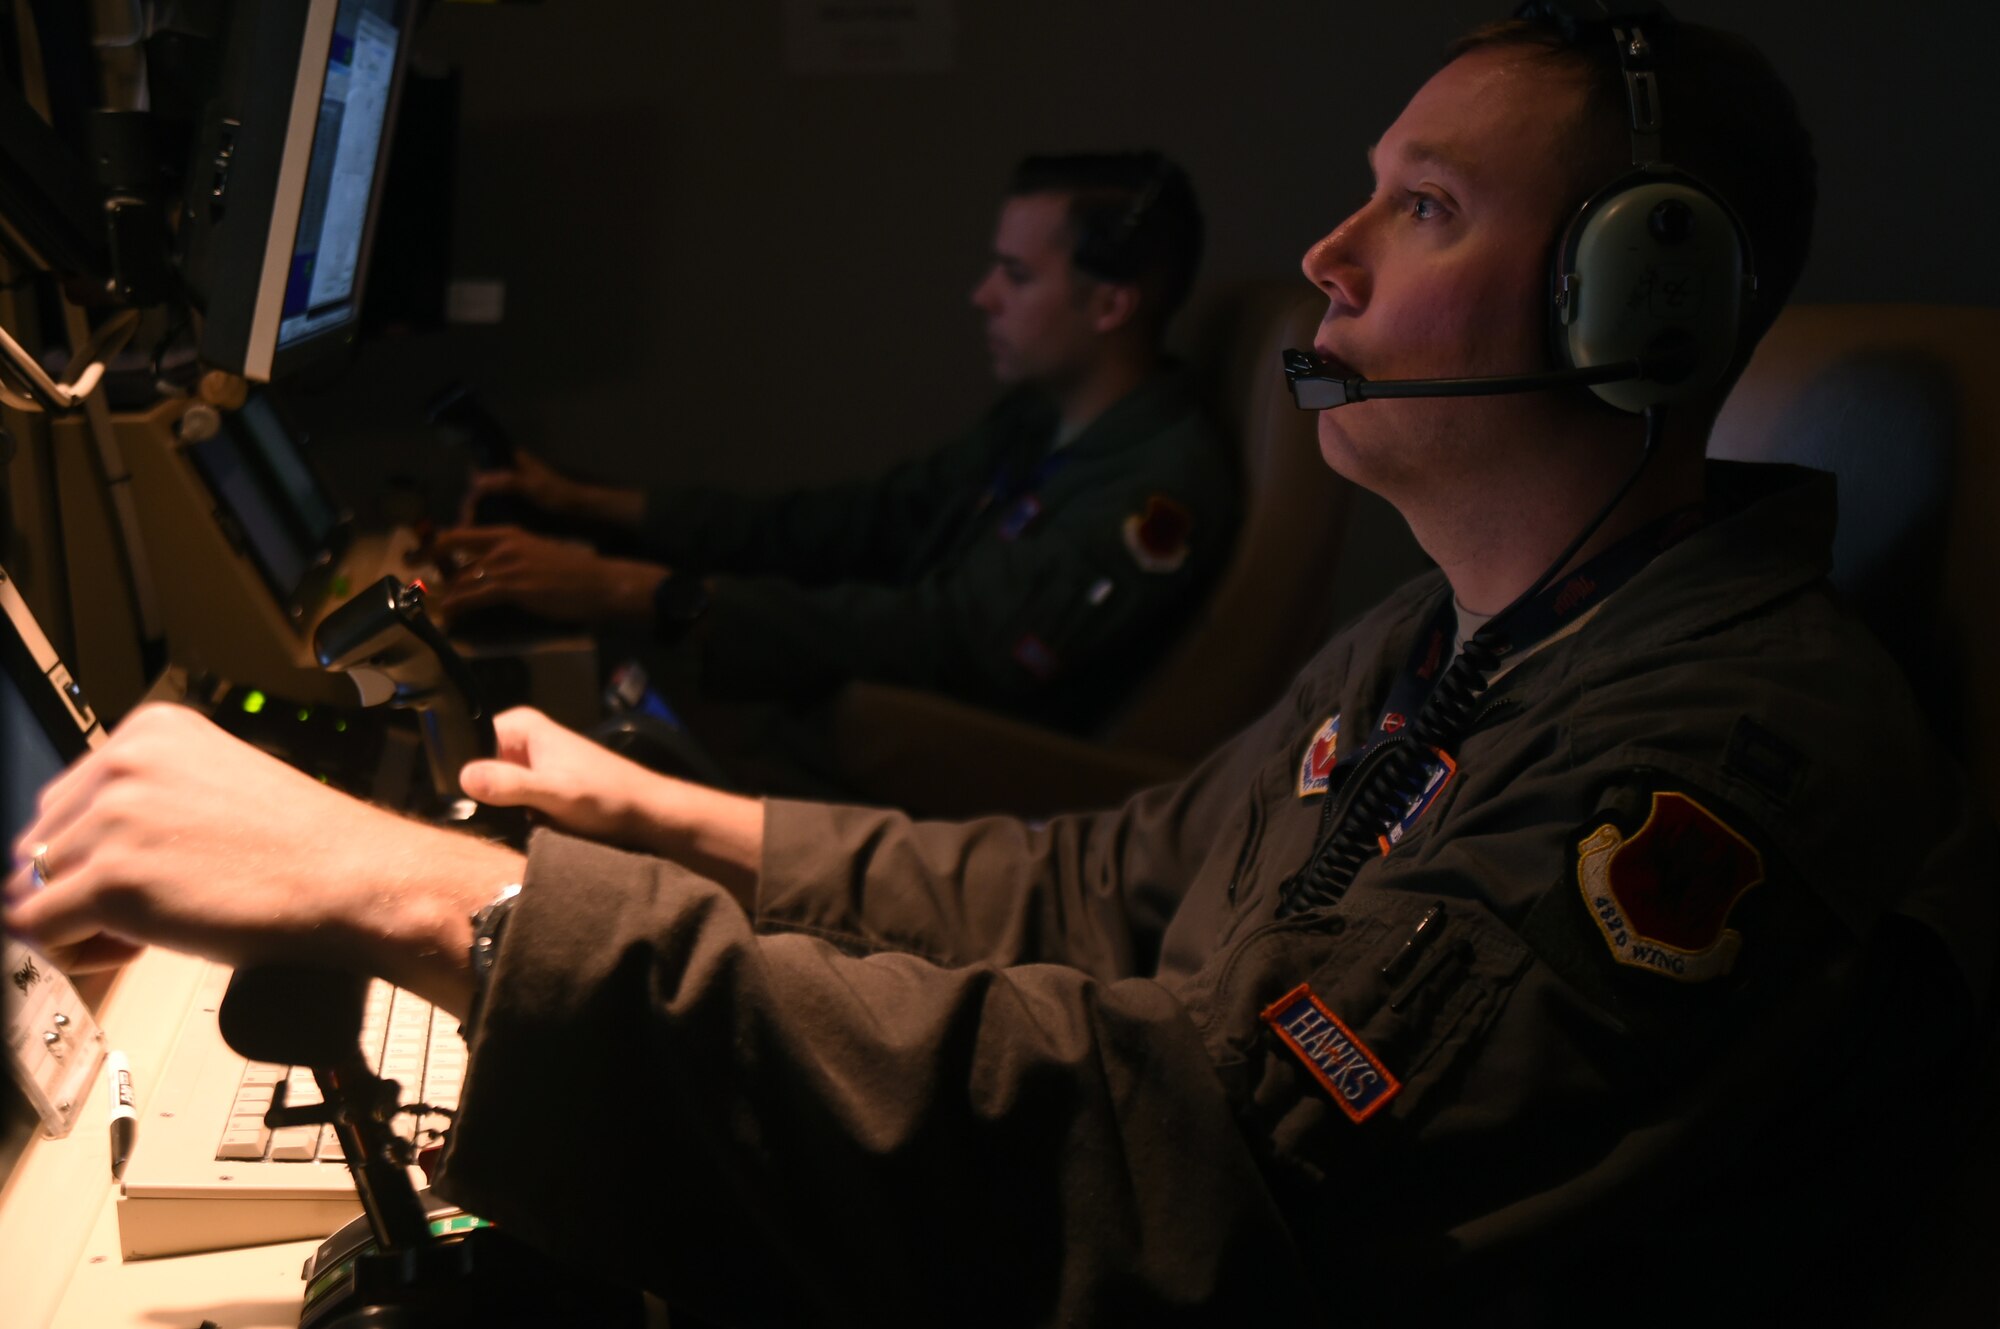 Capt. Benjamin, 18th Reconnaissance Squadron MQ-1 Predator pilot, flies a remotely piloted aircraft training sortie in support of Red Flag 15-3 at Creech Air Force Base, Nevada on July 23, 2015. Red Flag is a training tool used to build confidence, familiarity, and relationships among warfighters involved, including those with little to no experience partnering with other aircraft or ground personnel. (U.S. Air Force photo by Tech. Sgt. Nadine Barclay)